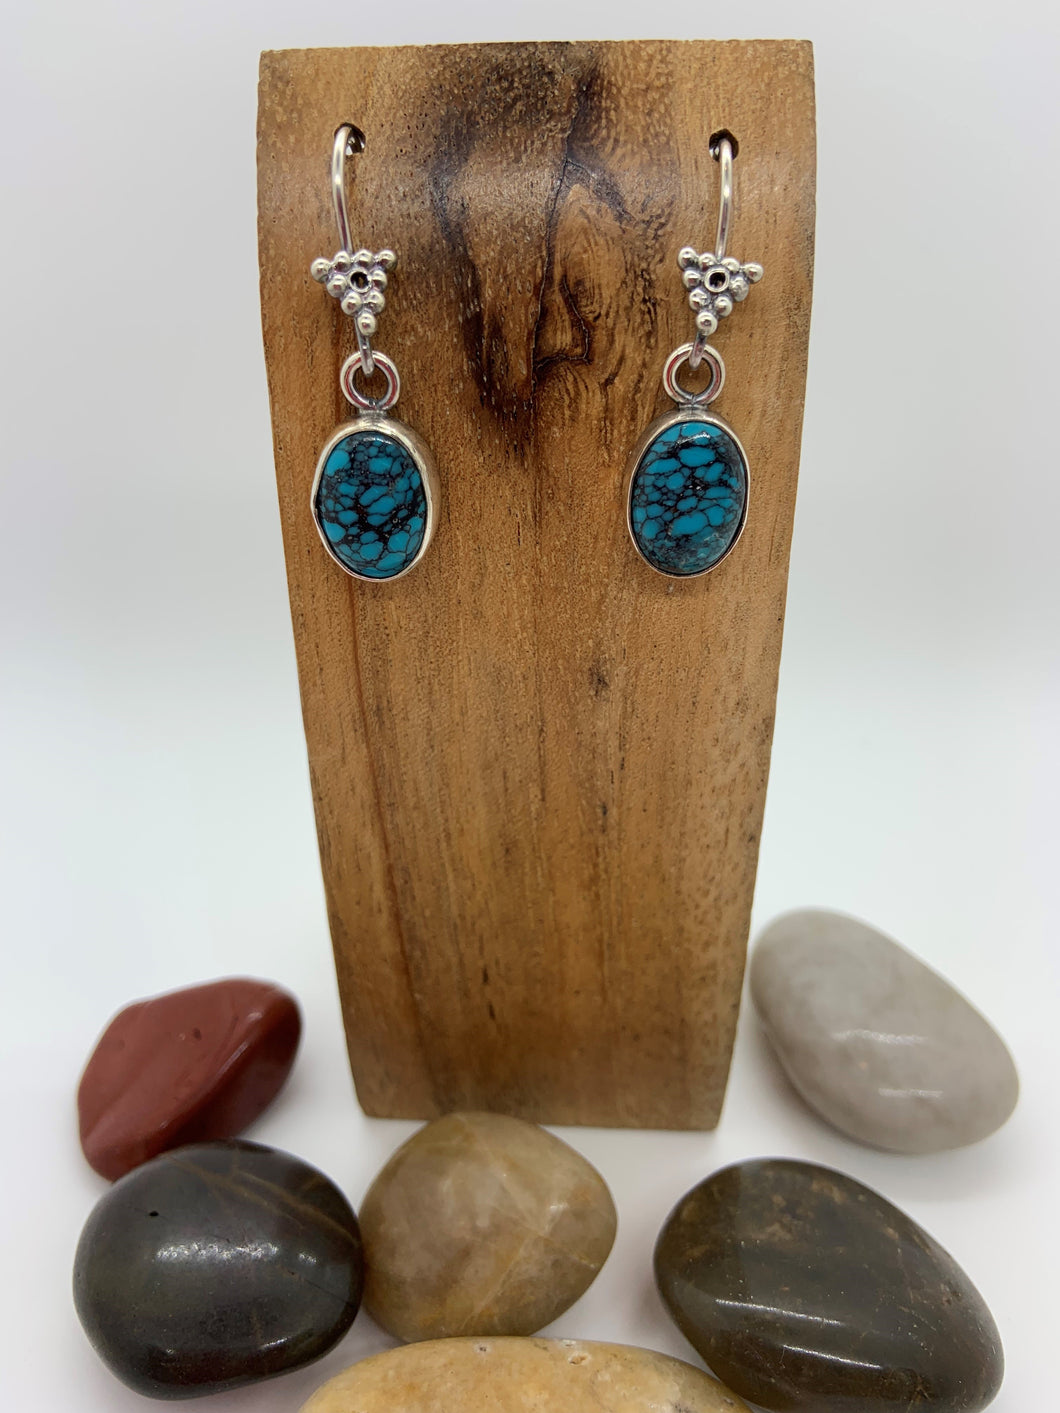 Yuangai Turquoise sterling silver earrings